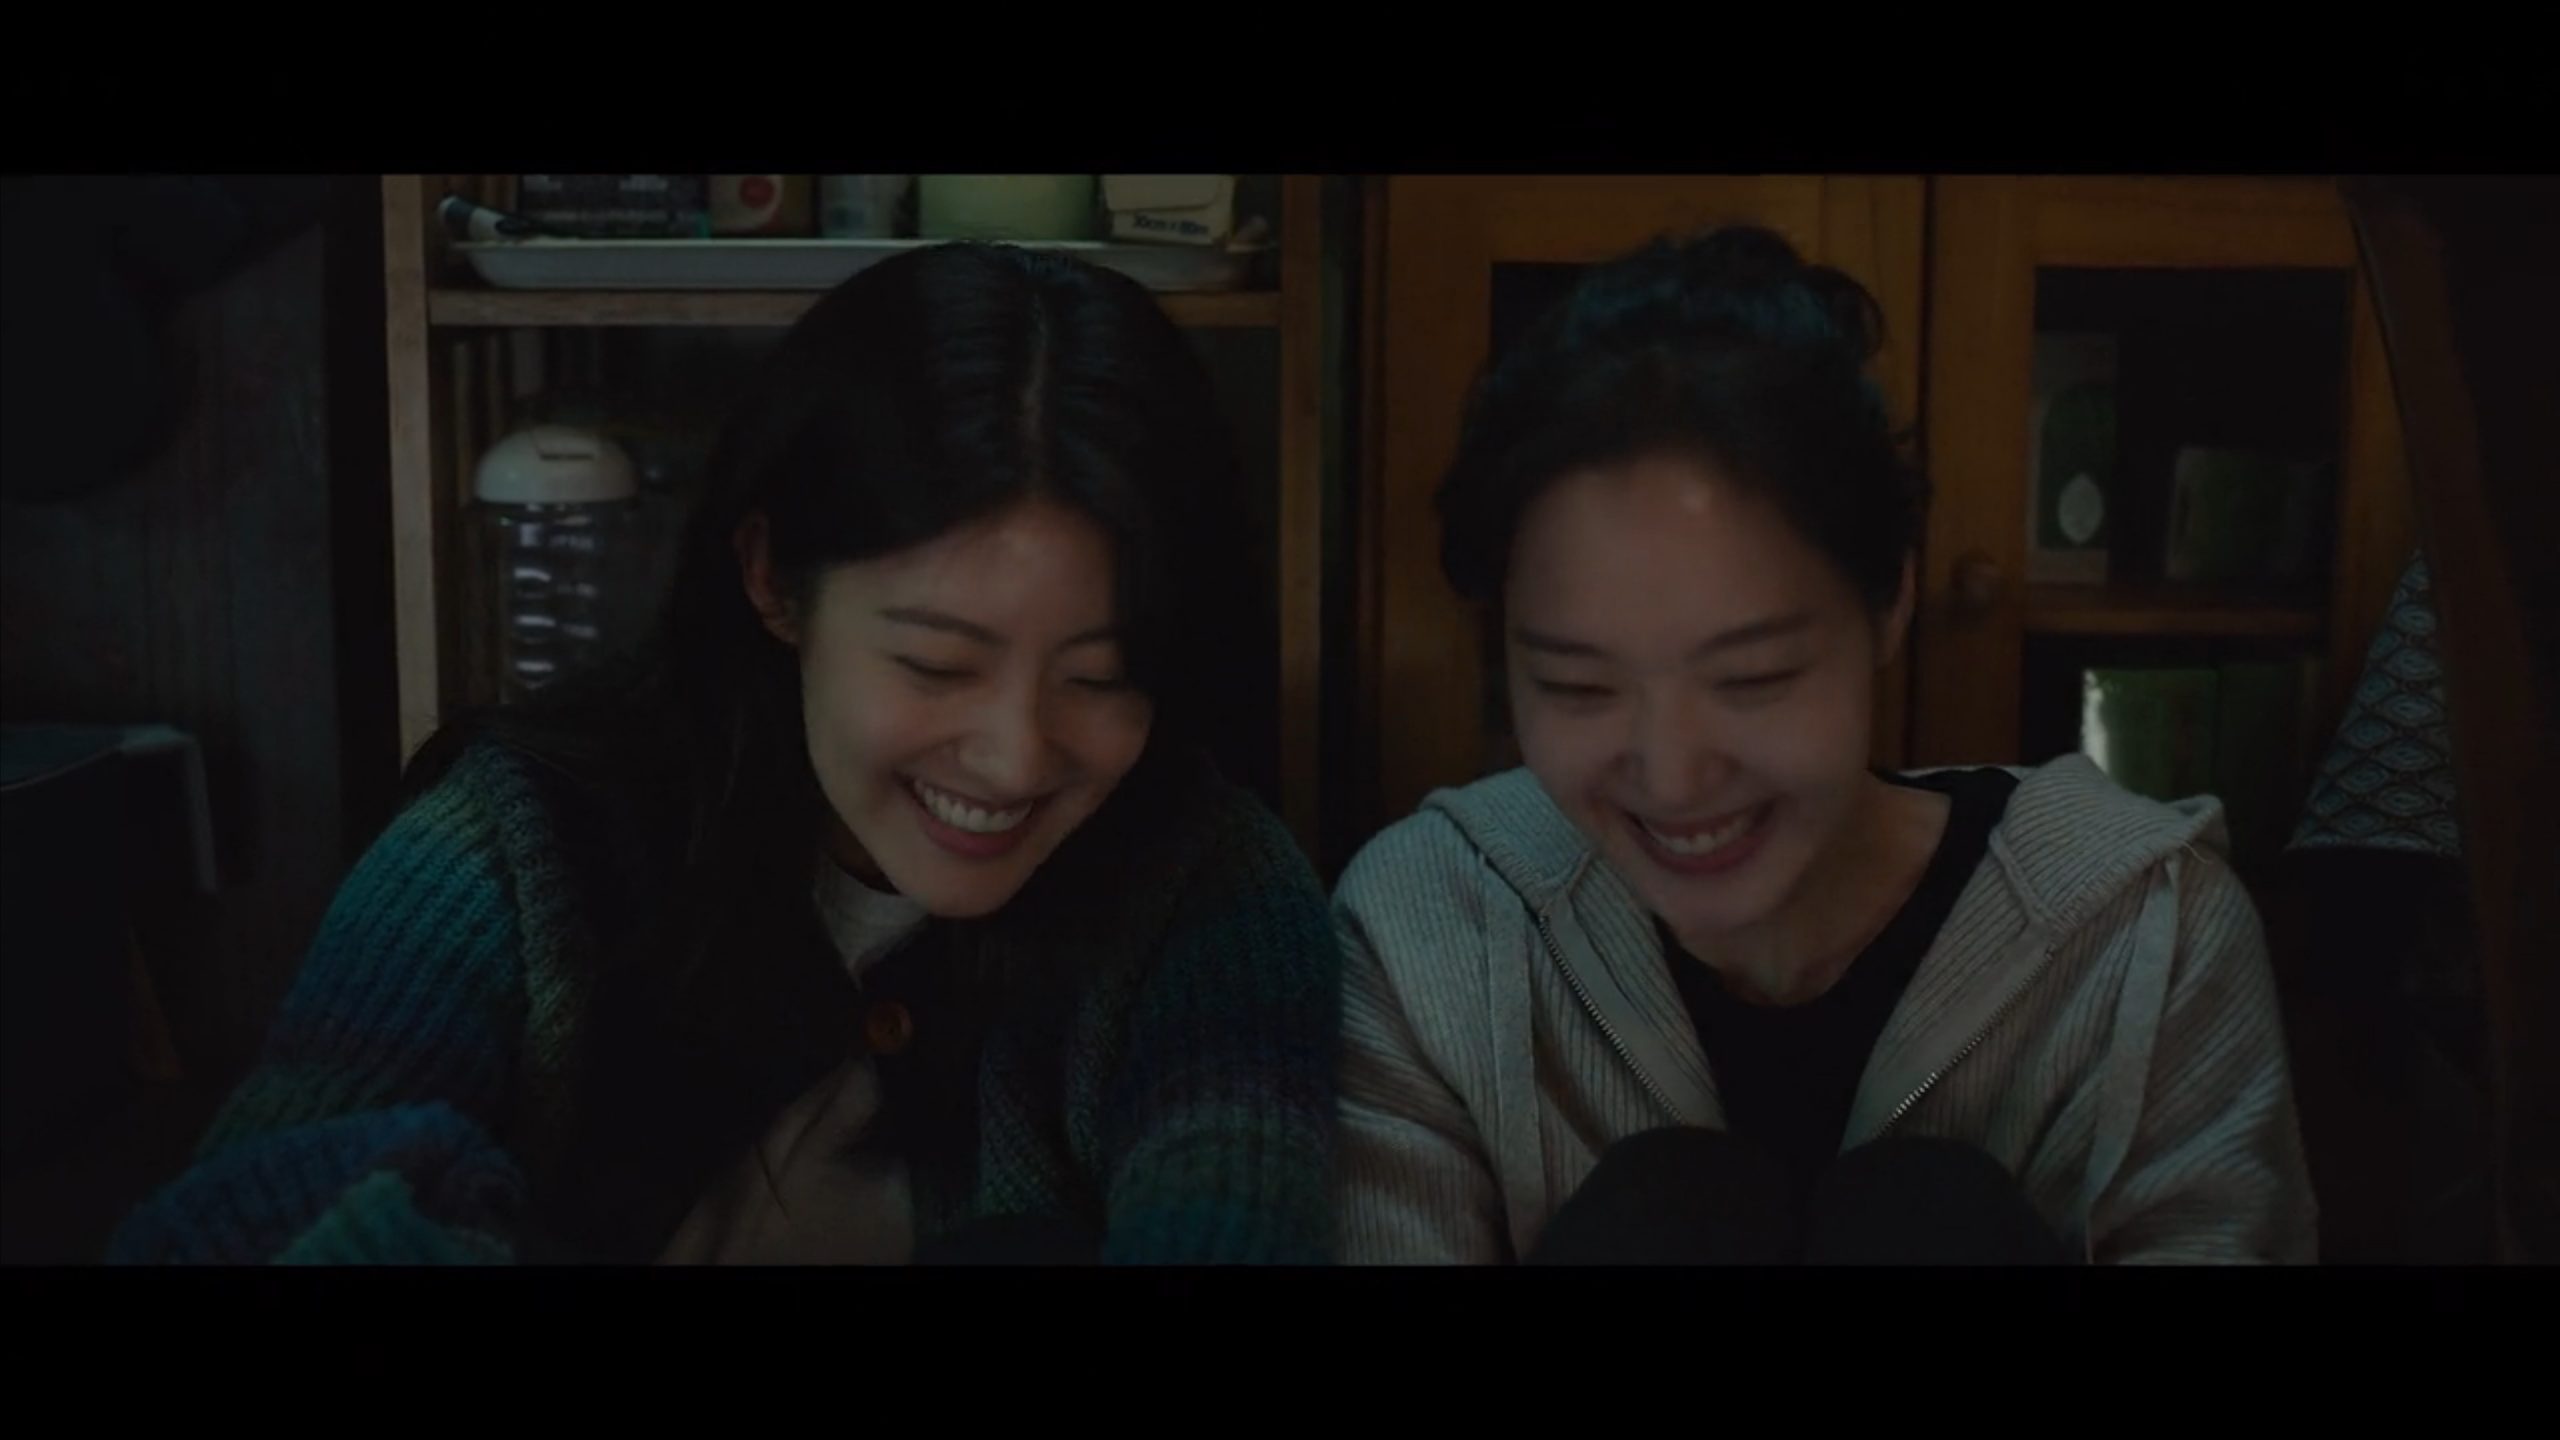 In-Ju (Kim Go-eun) and In-Kyung (Nam Ji-hyun) giddy about surprising In-hye with a birthday cake